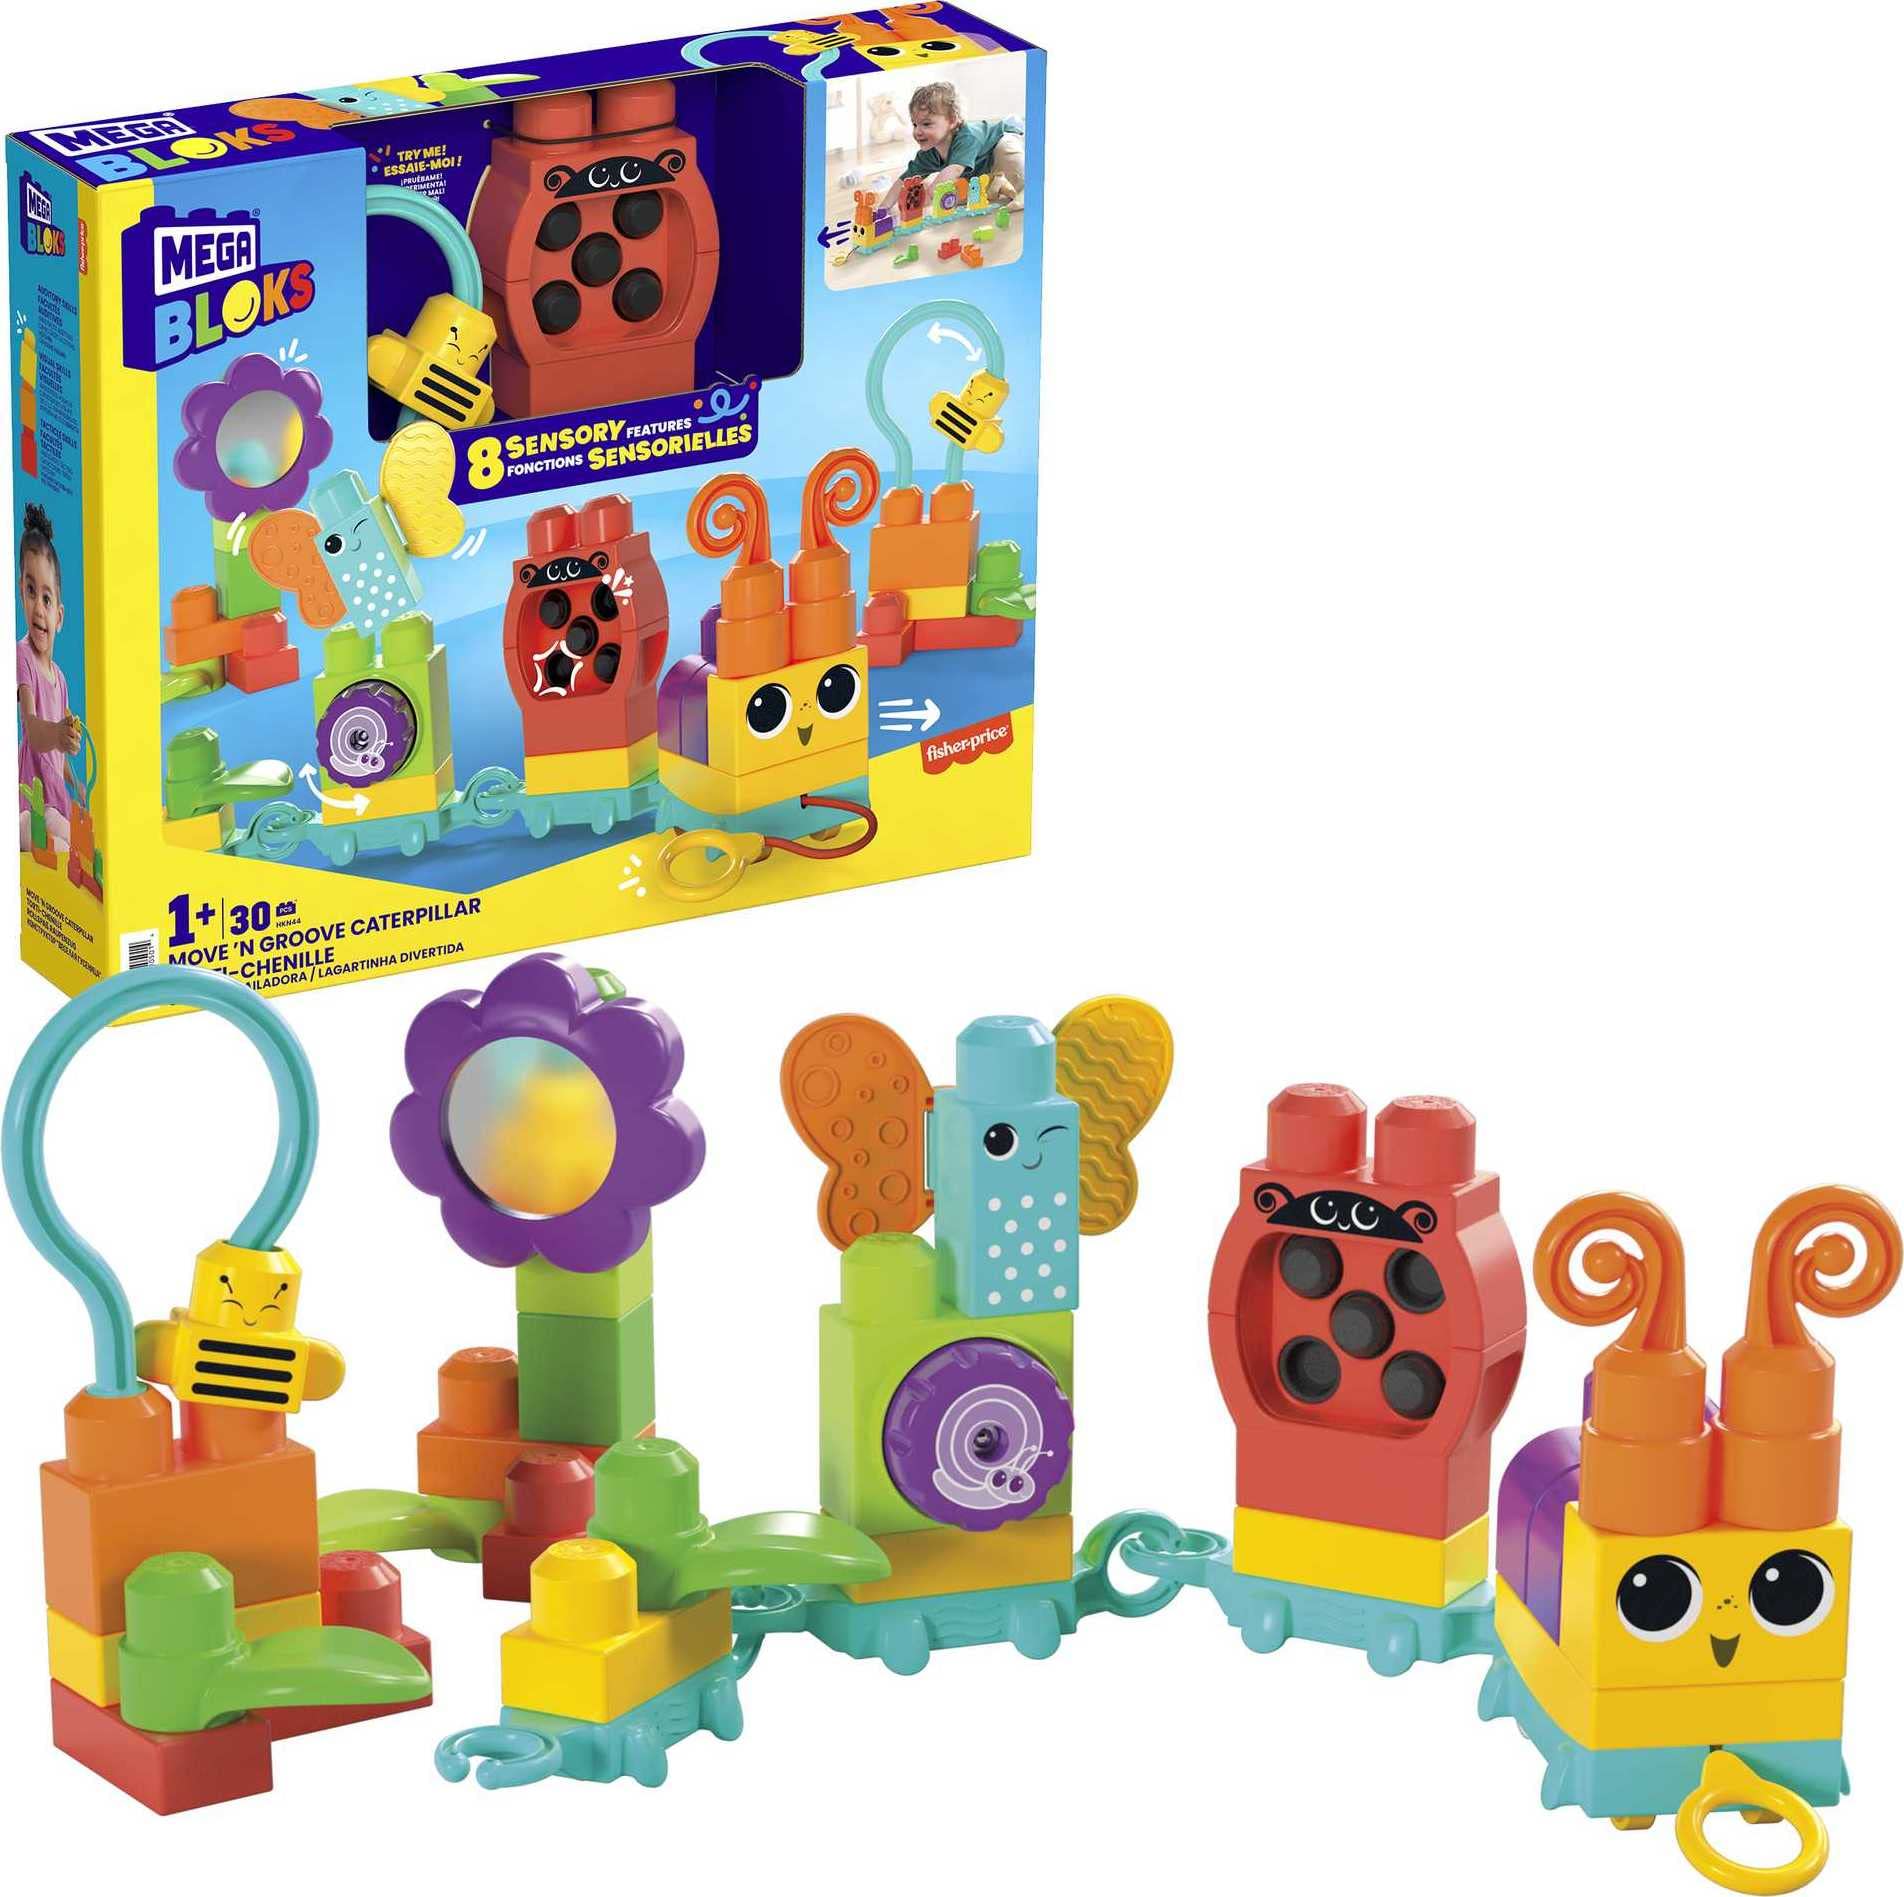 24-Pieces MEGA BLOKS Fisher Price Sensory Building Blocks Move N Groove Caterpillar Train $10.49 + Free Shipping w/ Prime or on $35+